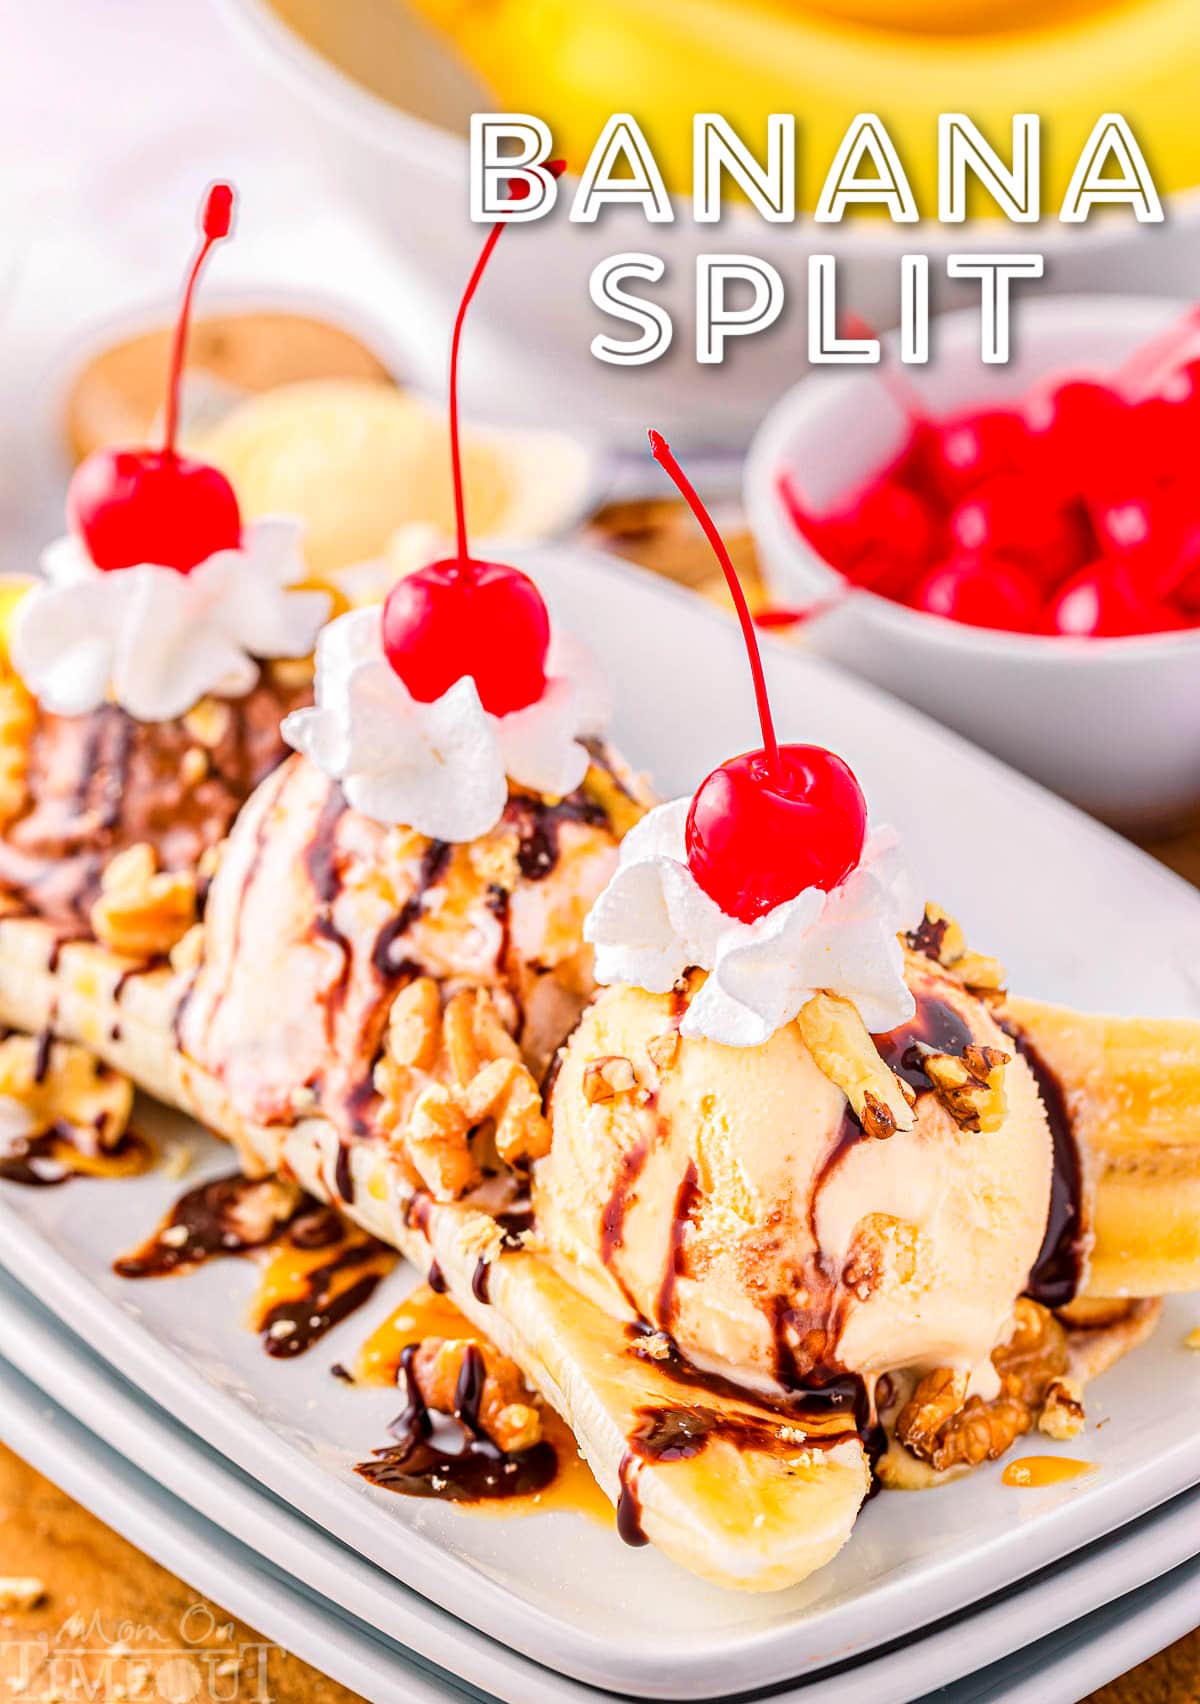 banana split on white plate topped with whipped cream and maraschino cherries. title overlay at top of image.